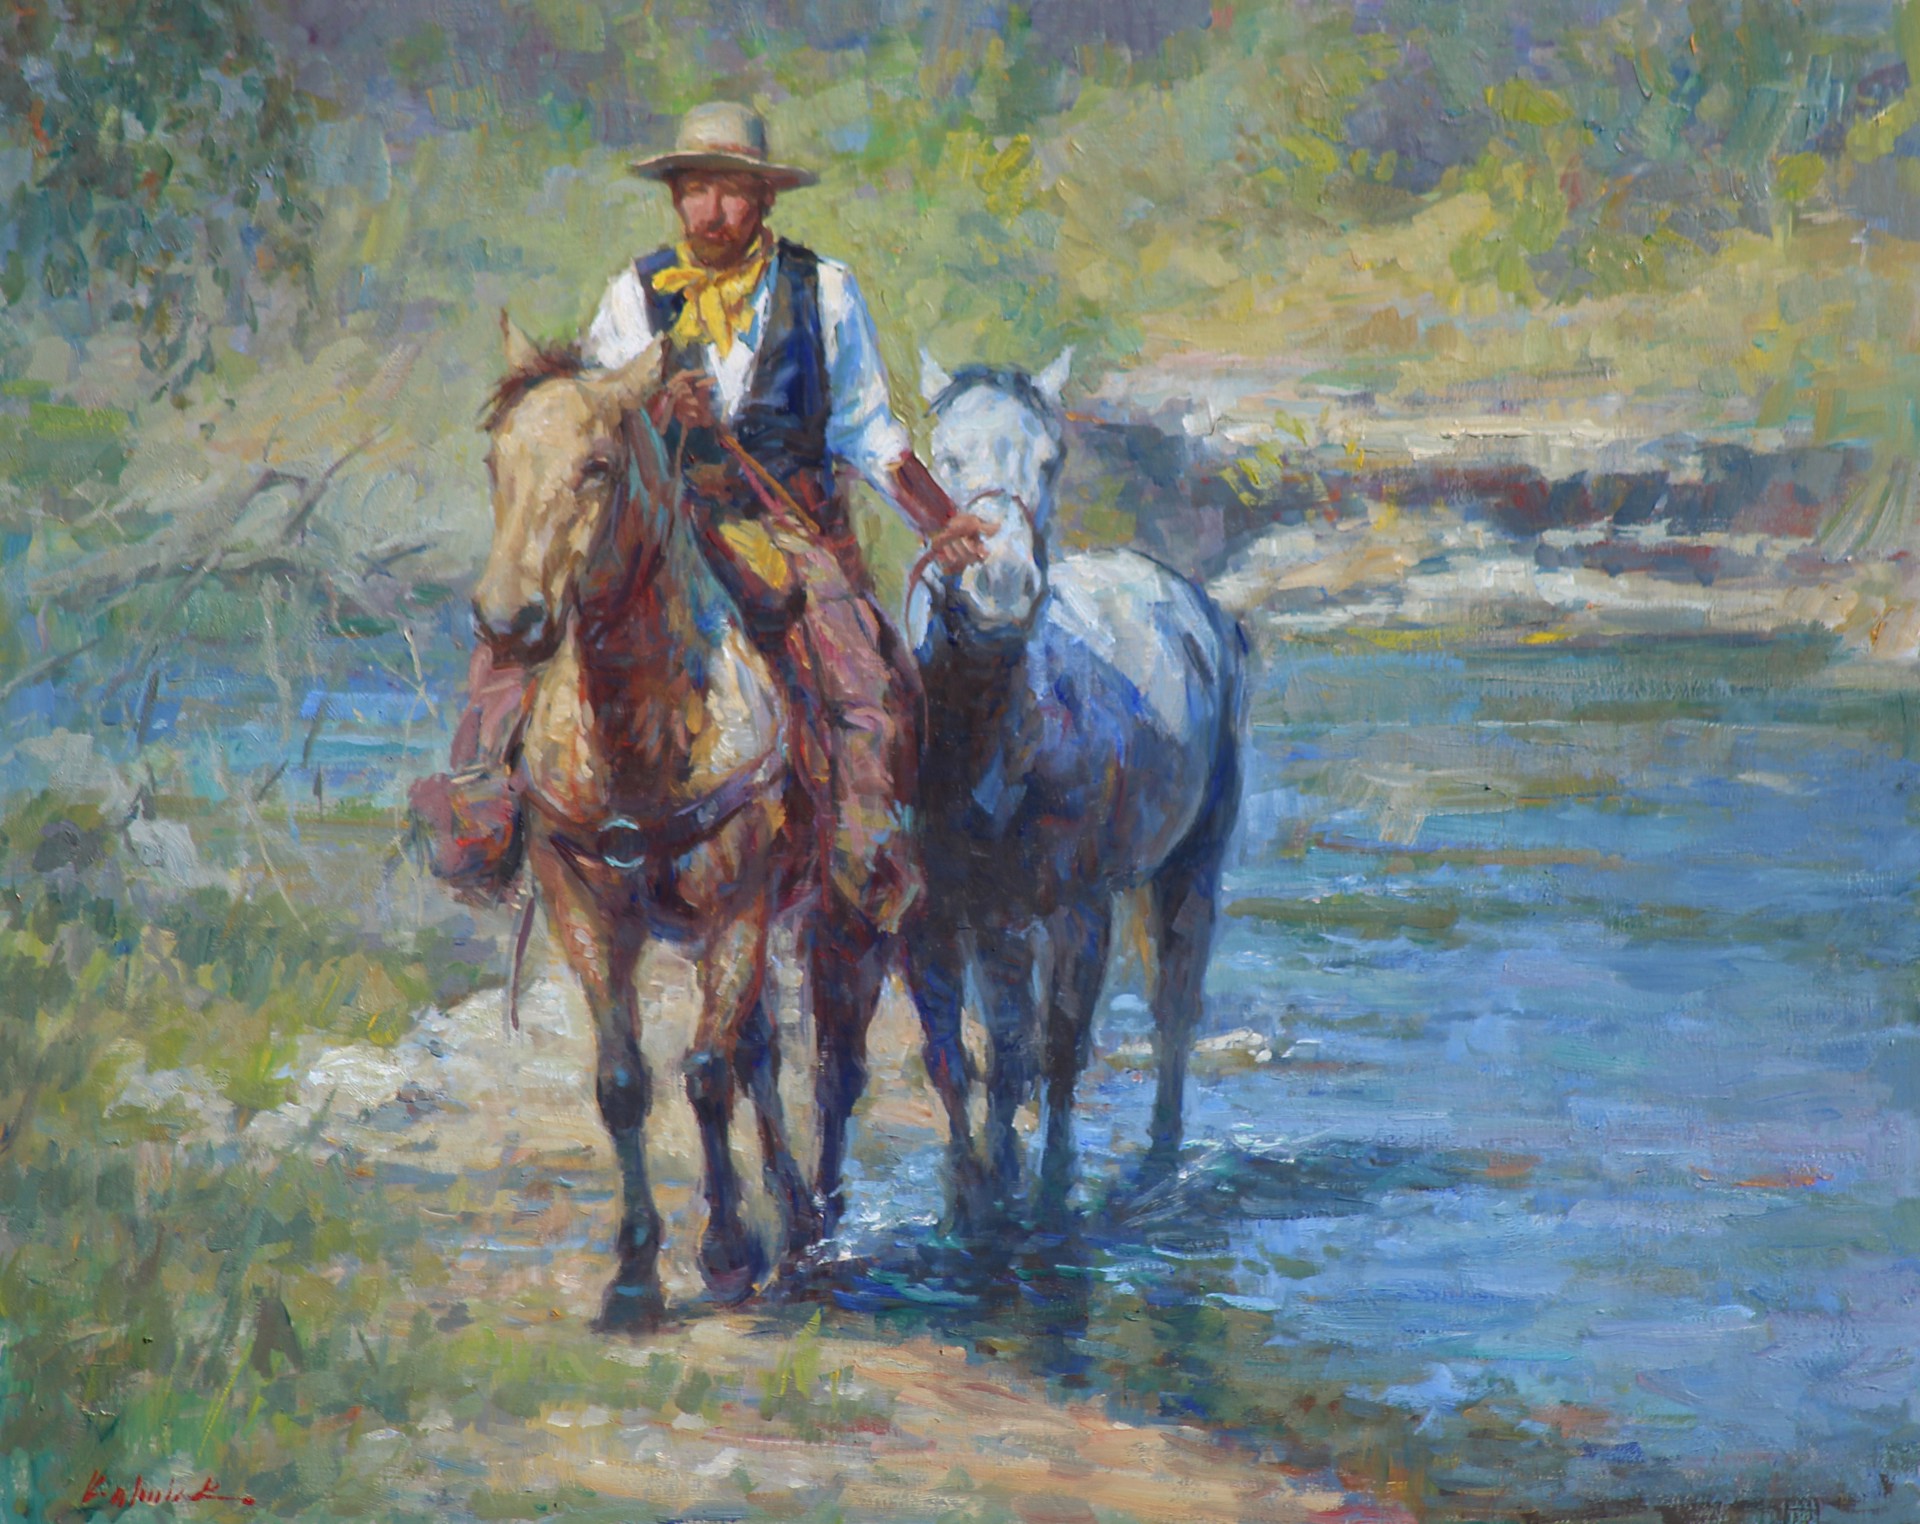 Along The Creek by William Kalwick